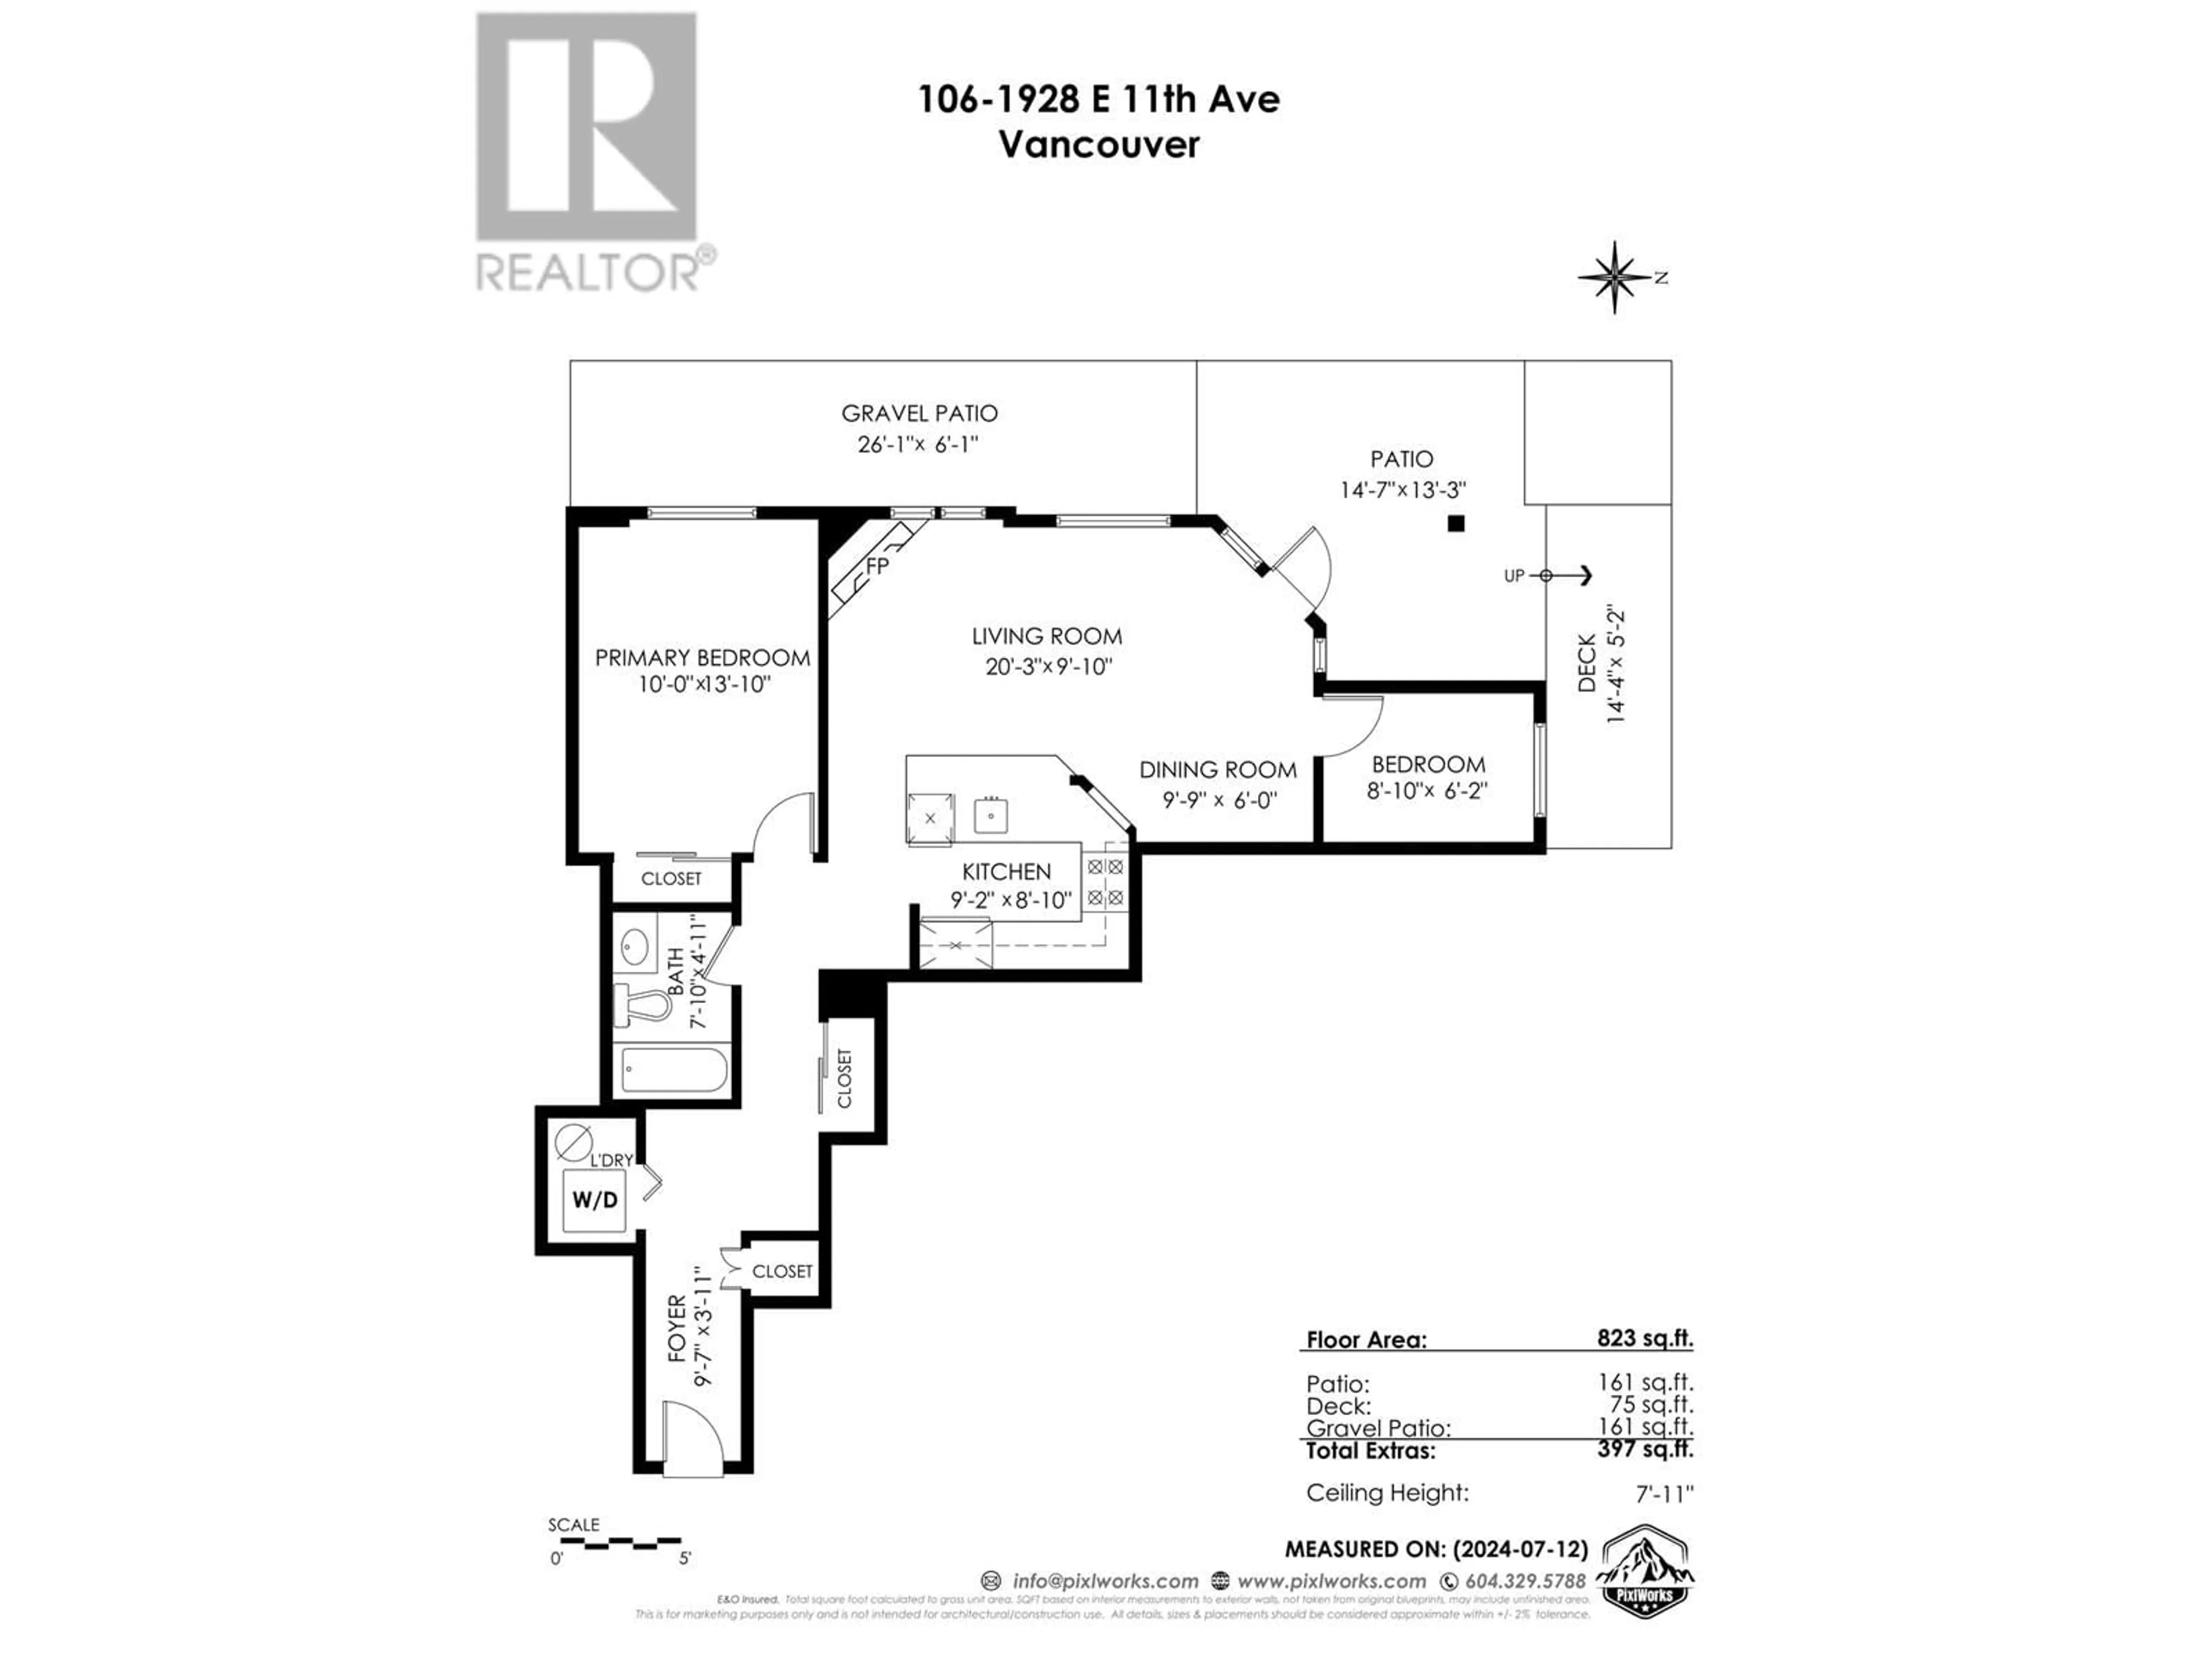 Floor plan for 106 1928 E 11TH AVENUE, Vancouver British Columbia V5N1Z2